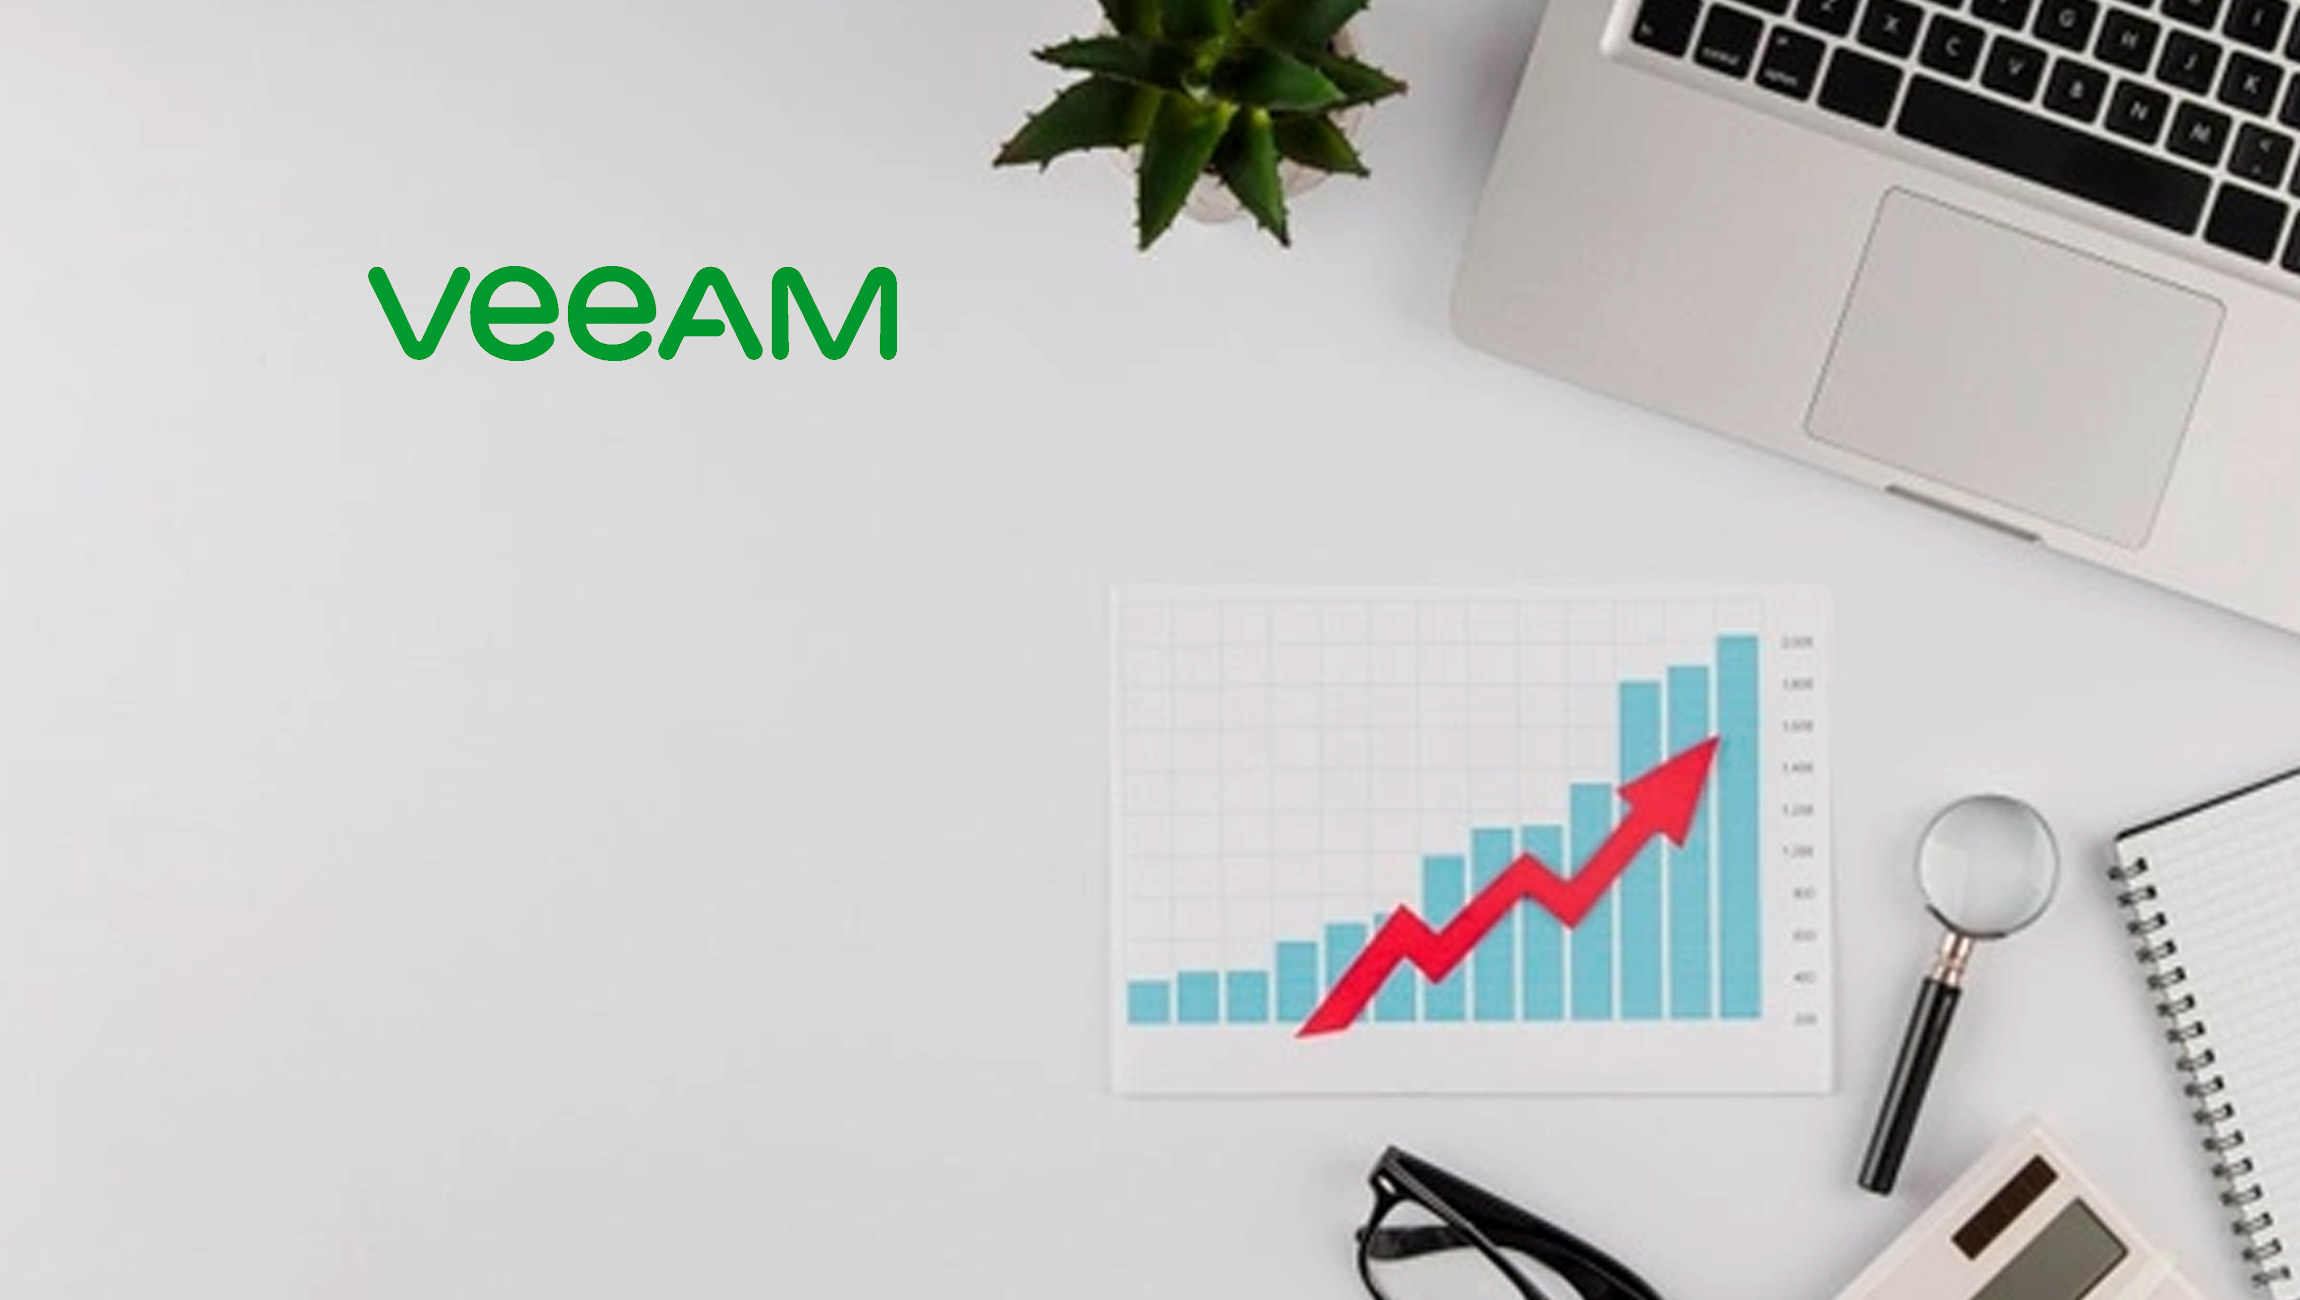 Veeam-Reports-28%-Growth-in-Q3’2021-as-Enterprises-Increase-Cloud-Adoption-and-Invest-in-Modern-Data-Protection